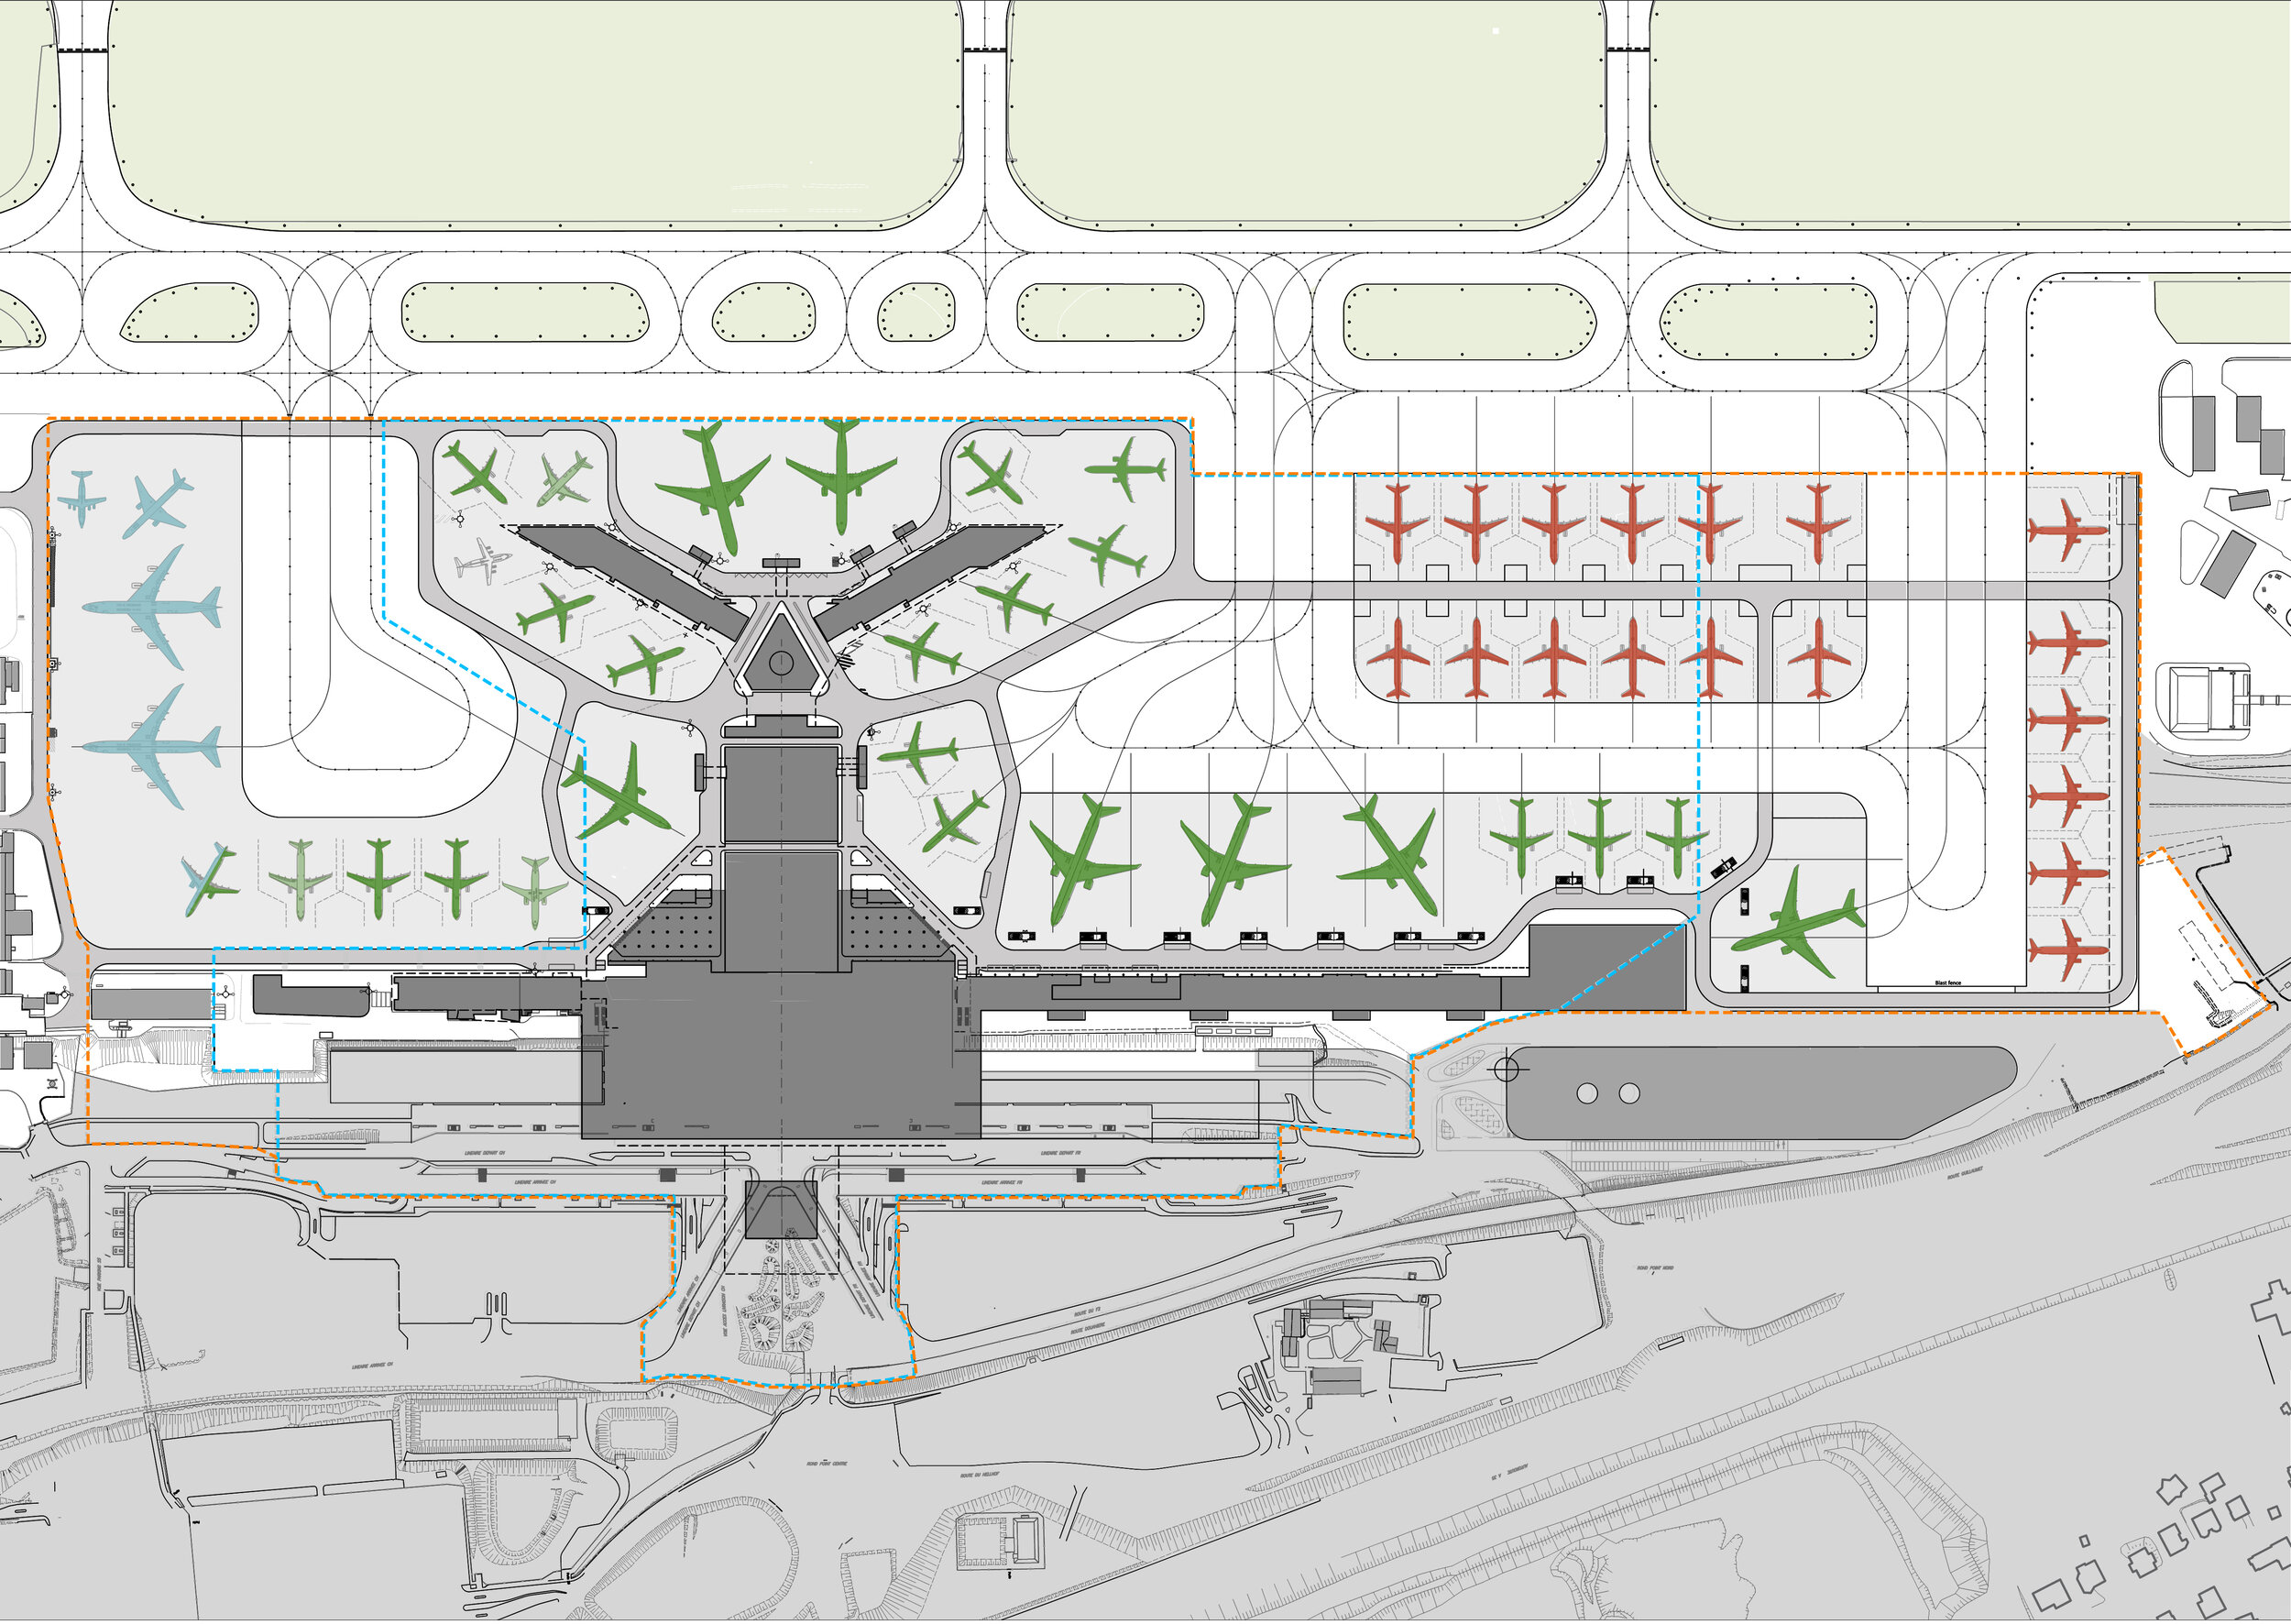 Floorplan of the extended passenger terminal at the EuroAirport